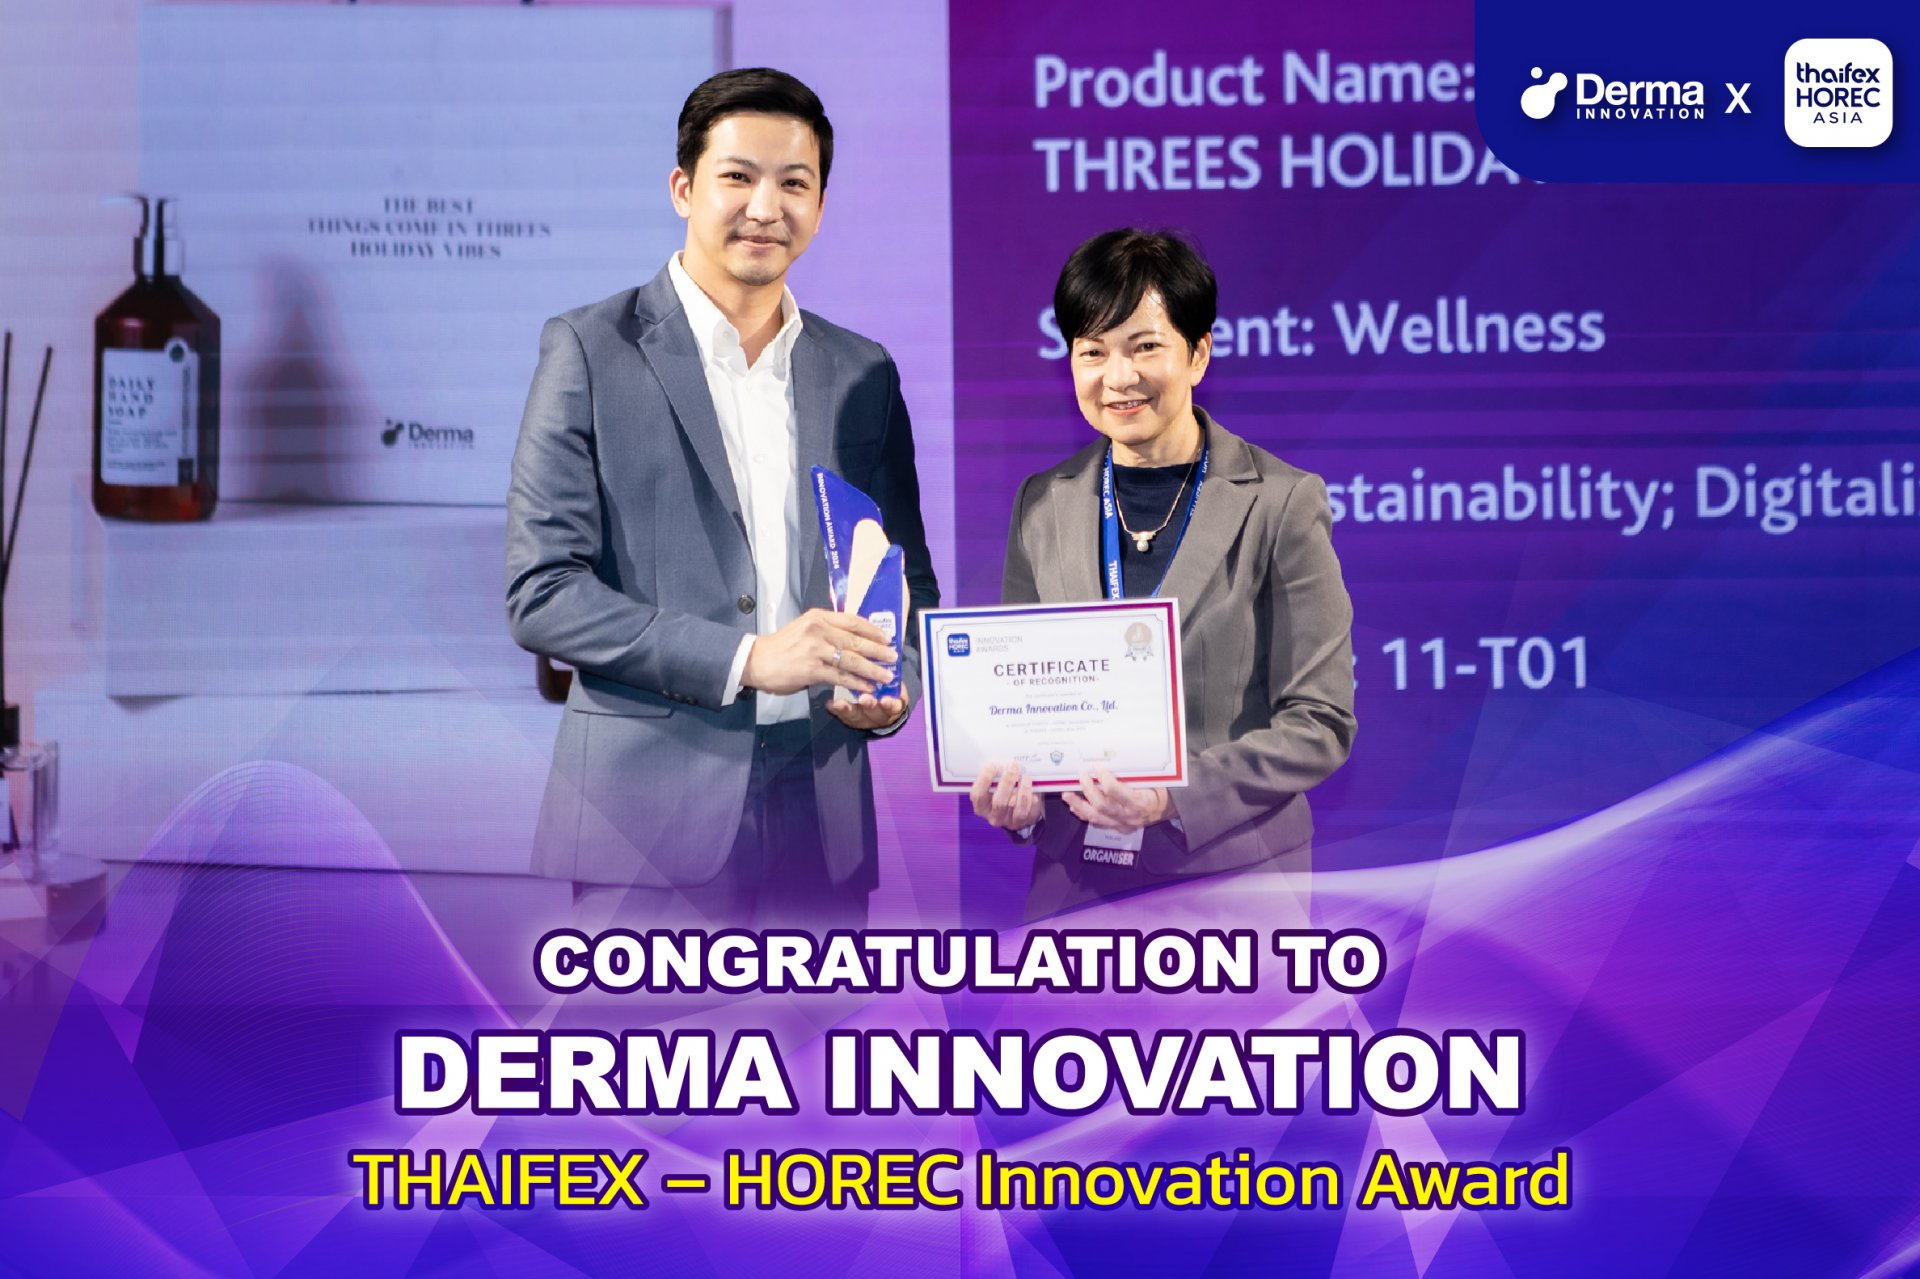 Congratulations to Derma Innovation for the THAIFEX-HOREC Innovation Award.